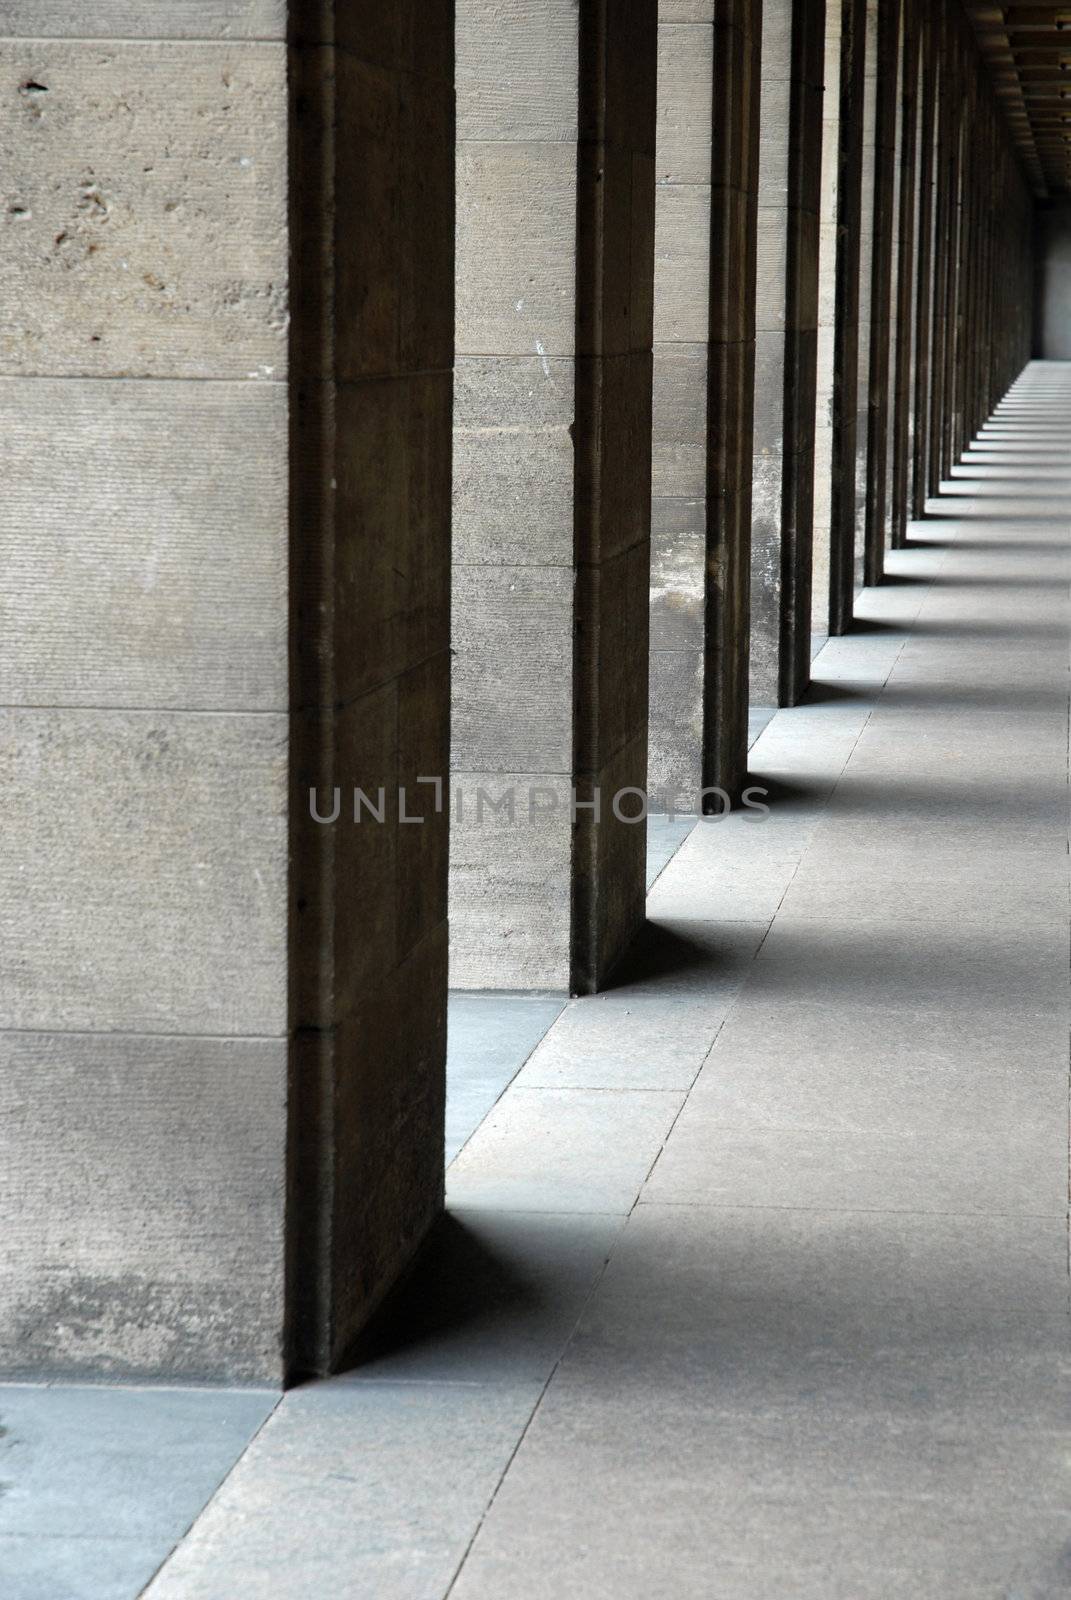 Columns in a row by cienpies